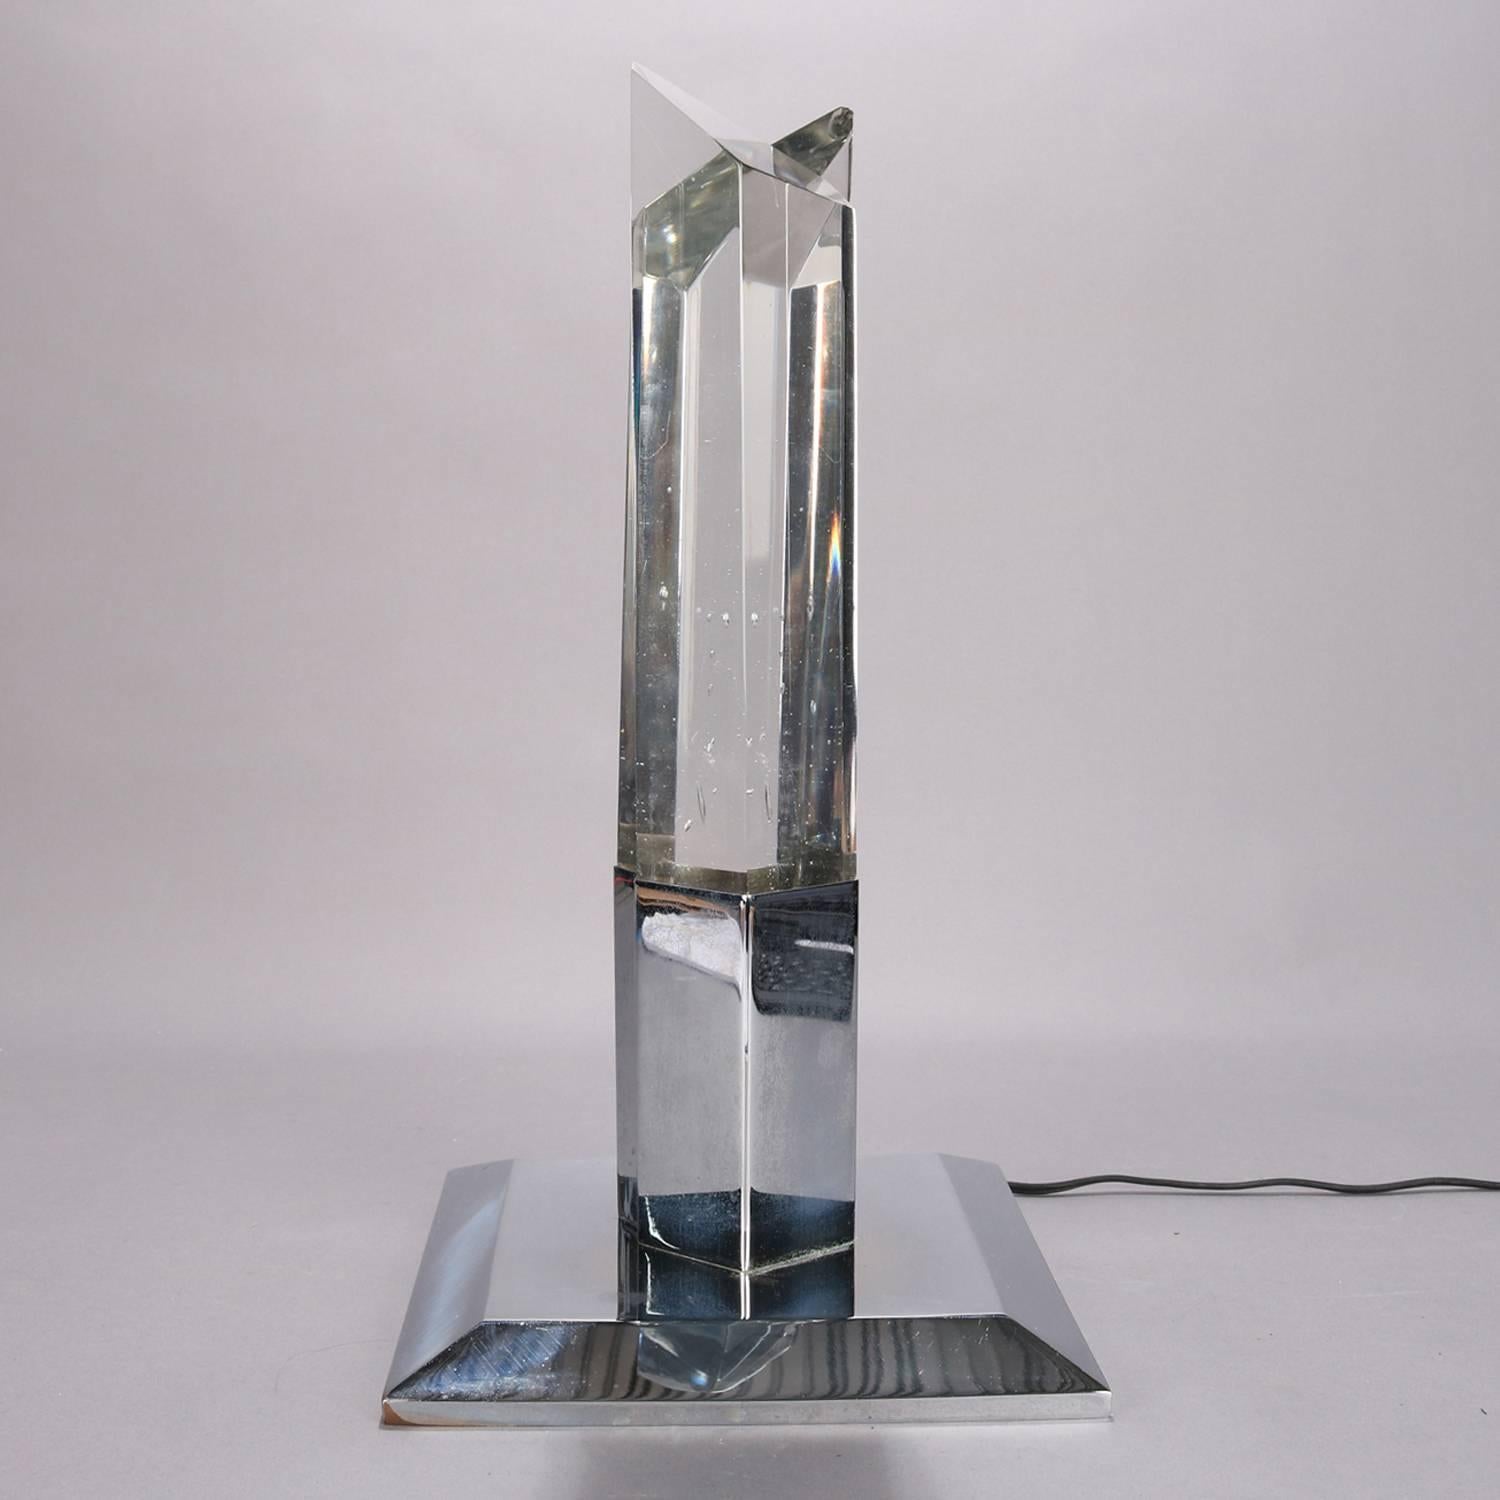 Mid-Century Modern Italian Venini school sculptural prism table lamp features chrome base with double crystals reminiscent of skyscrapers, mid-20th century

Measures: 19